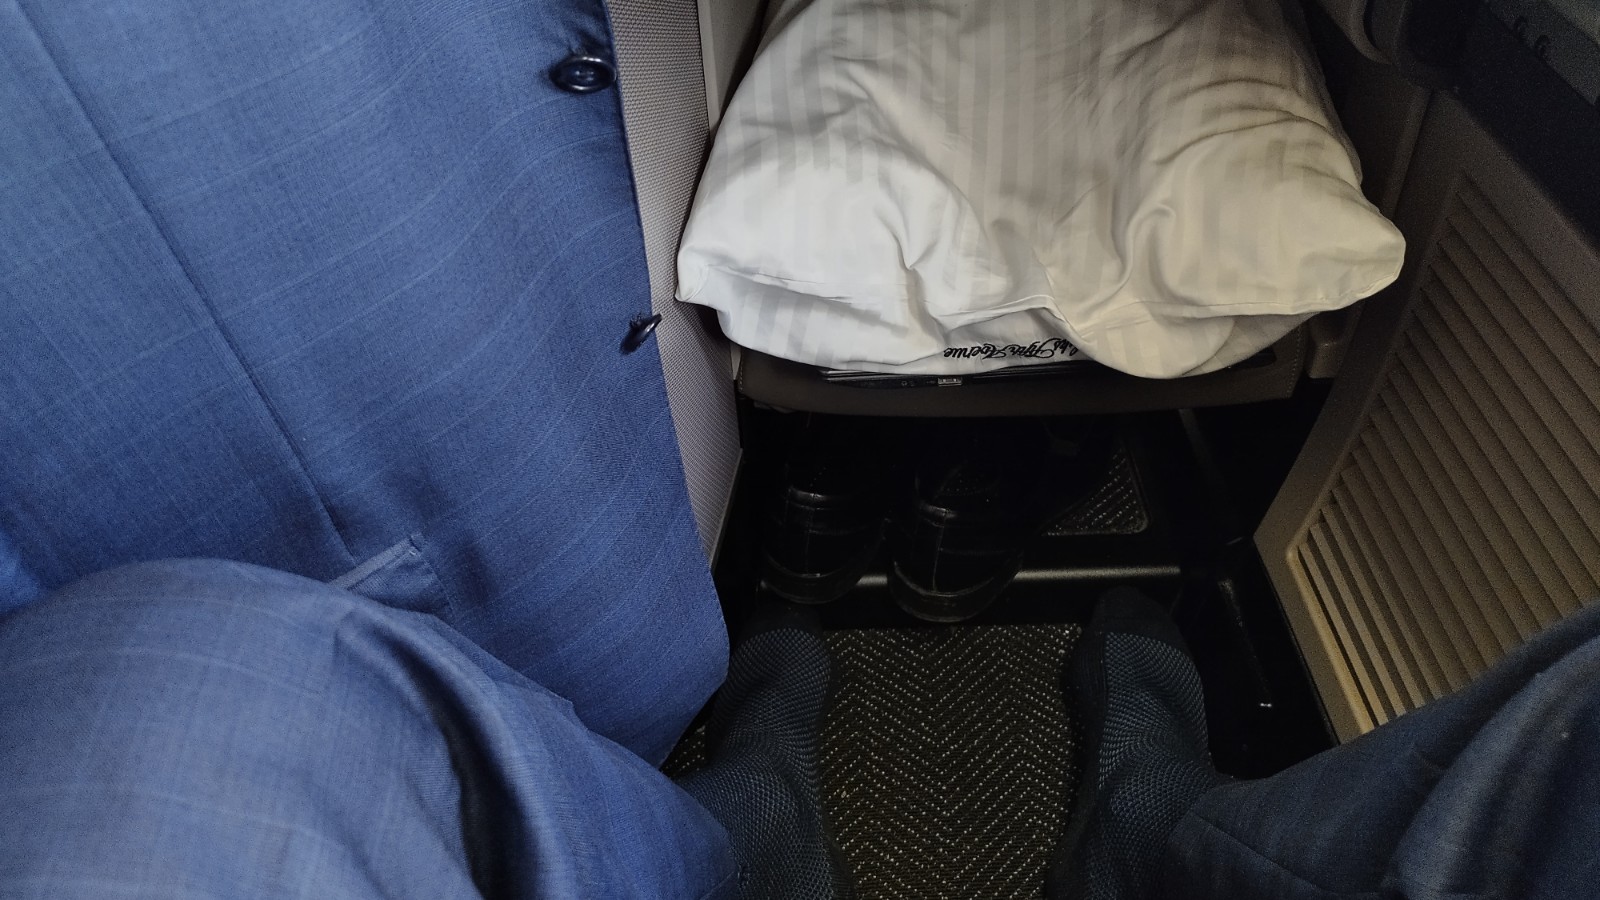 PICTURE OF THE LEG ROOM FROM MY SEAT.